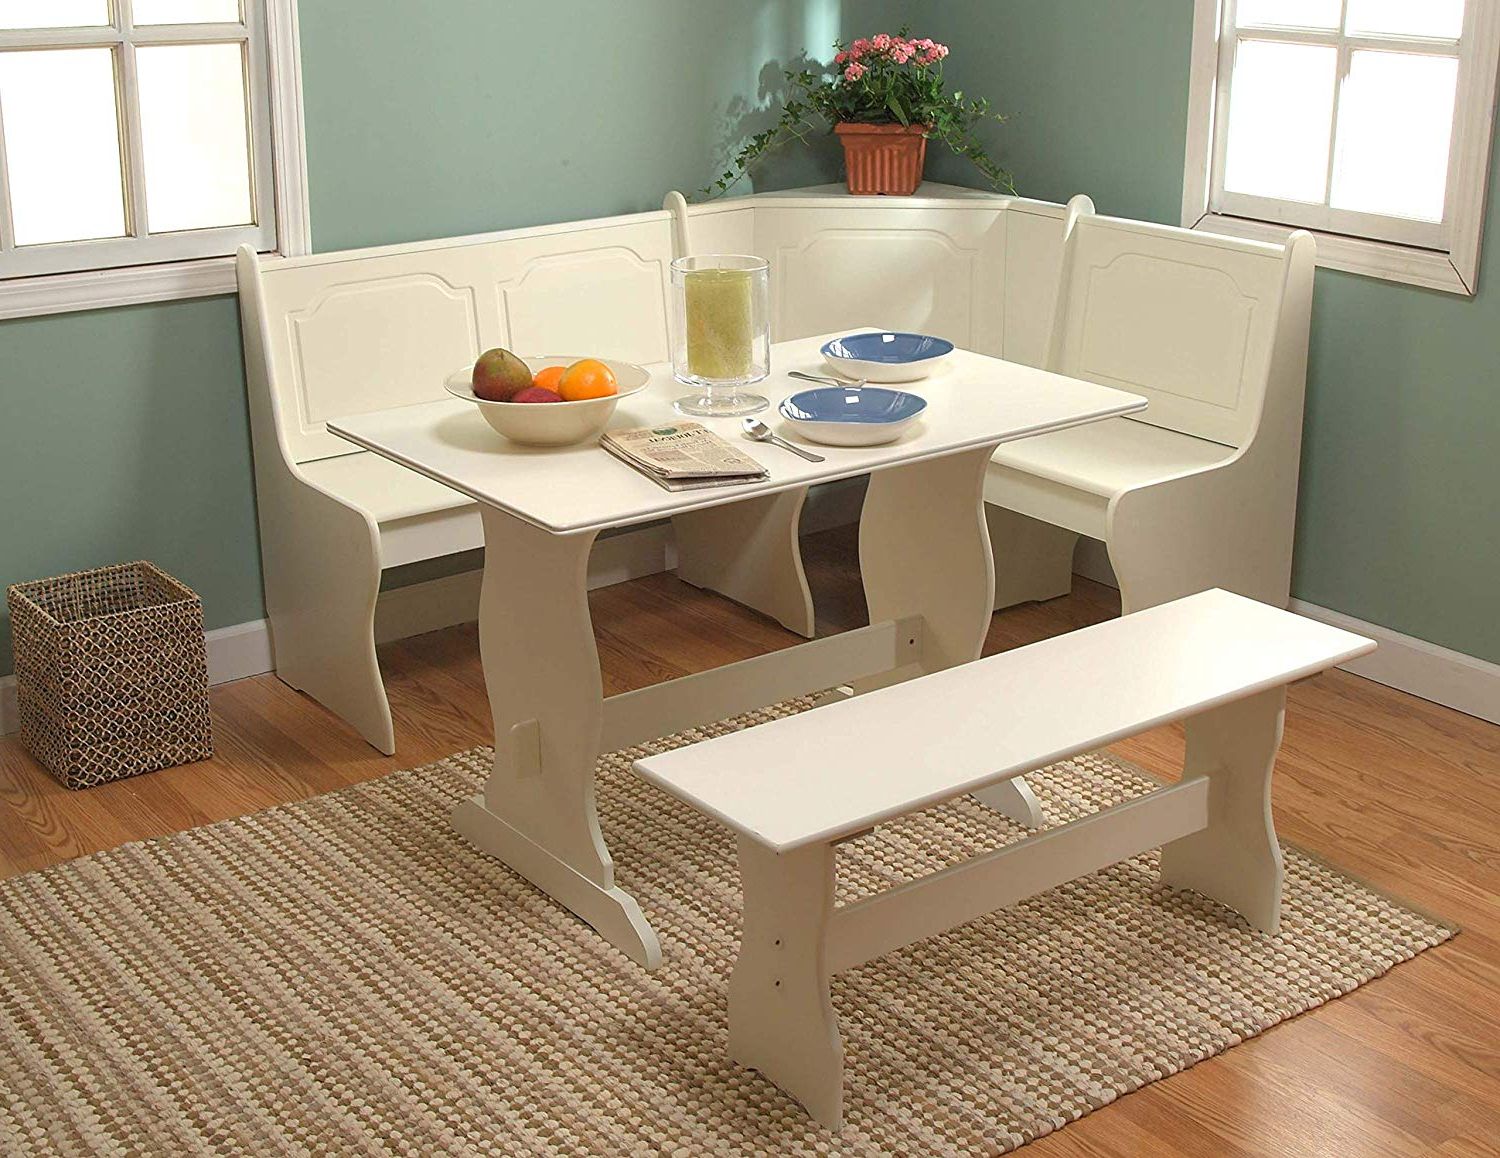 2019 Amazon: Target Marketing Systems 3 Piece Breakfast Nook Dining In Ligon 3 Piece Breakfast Nook Dining Sets (Photo 3 of 25)